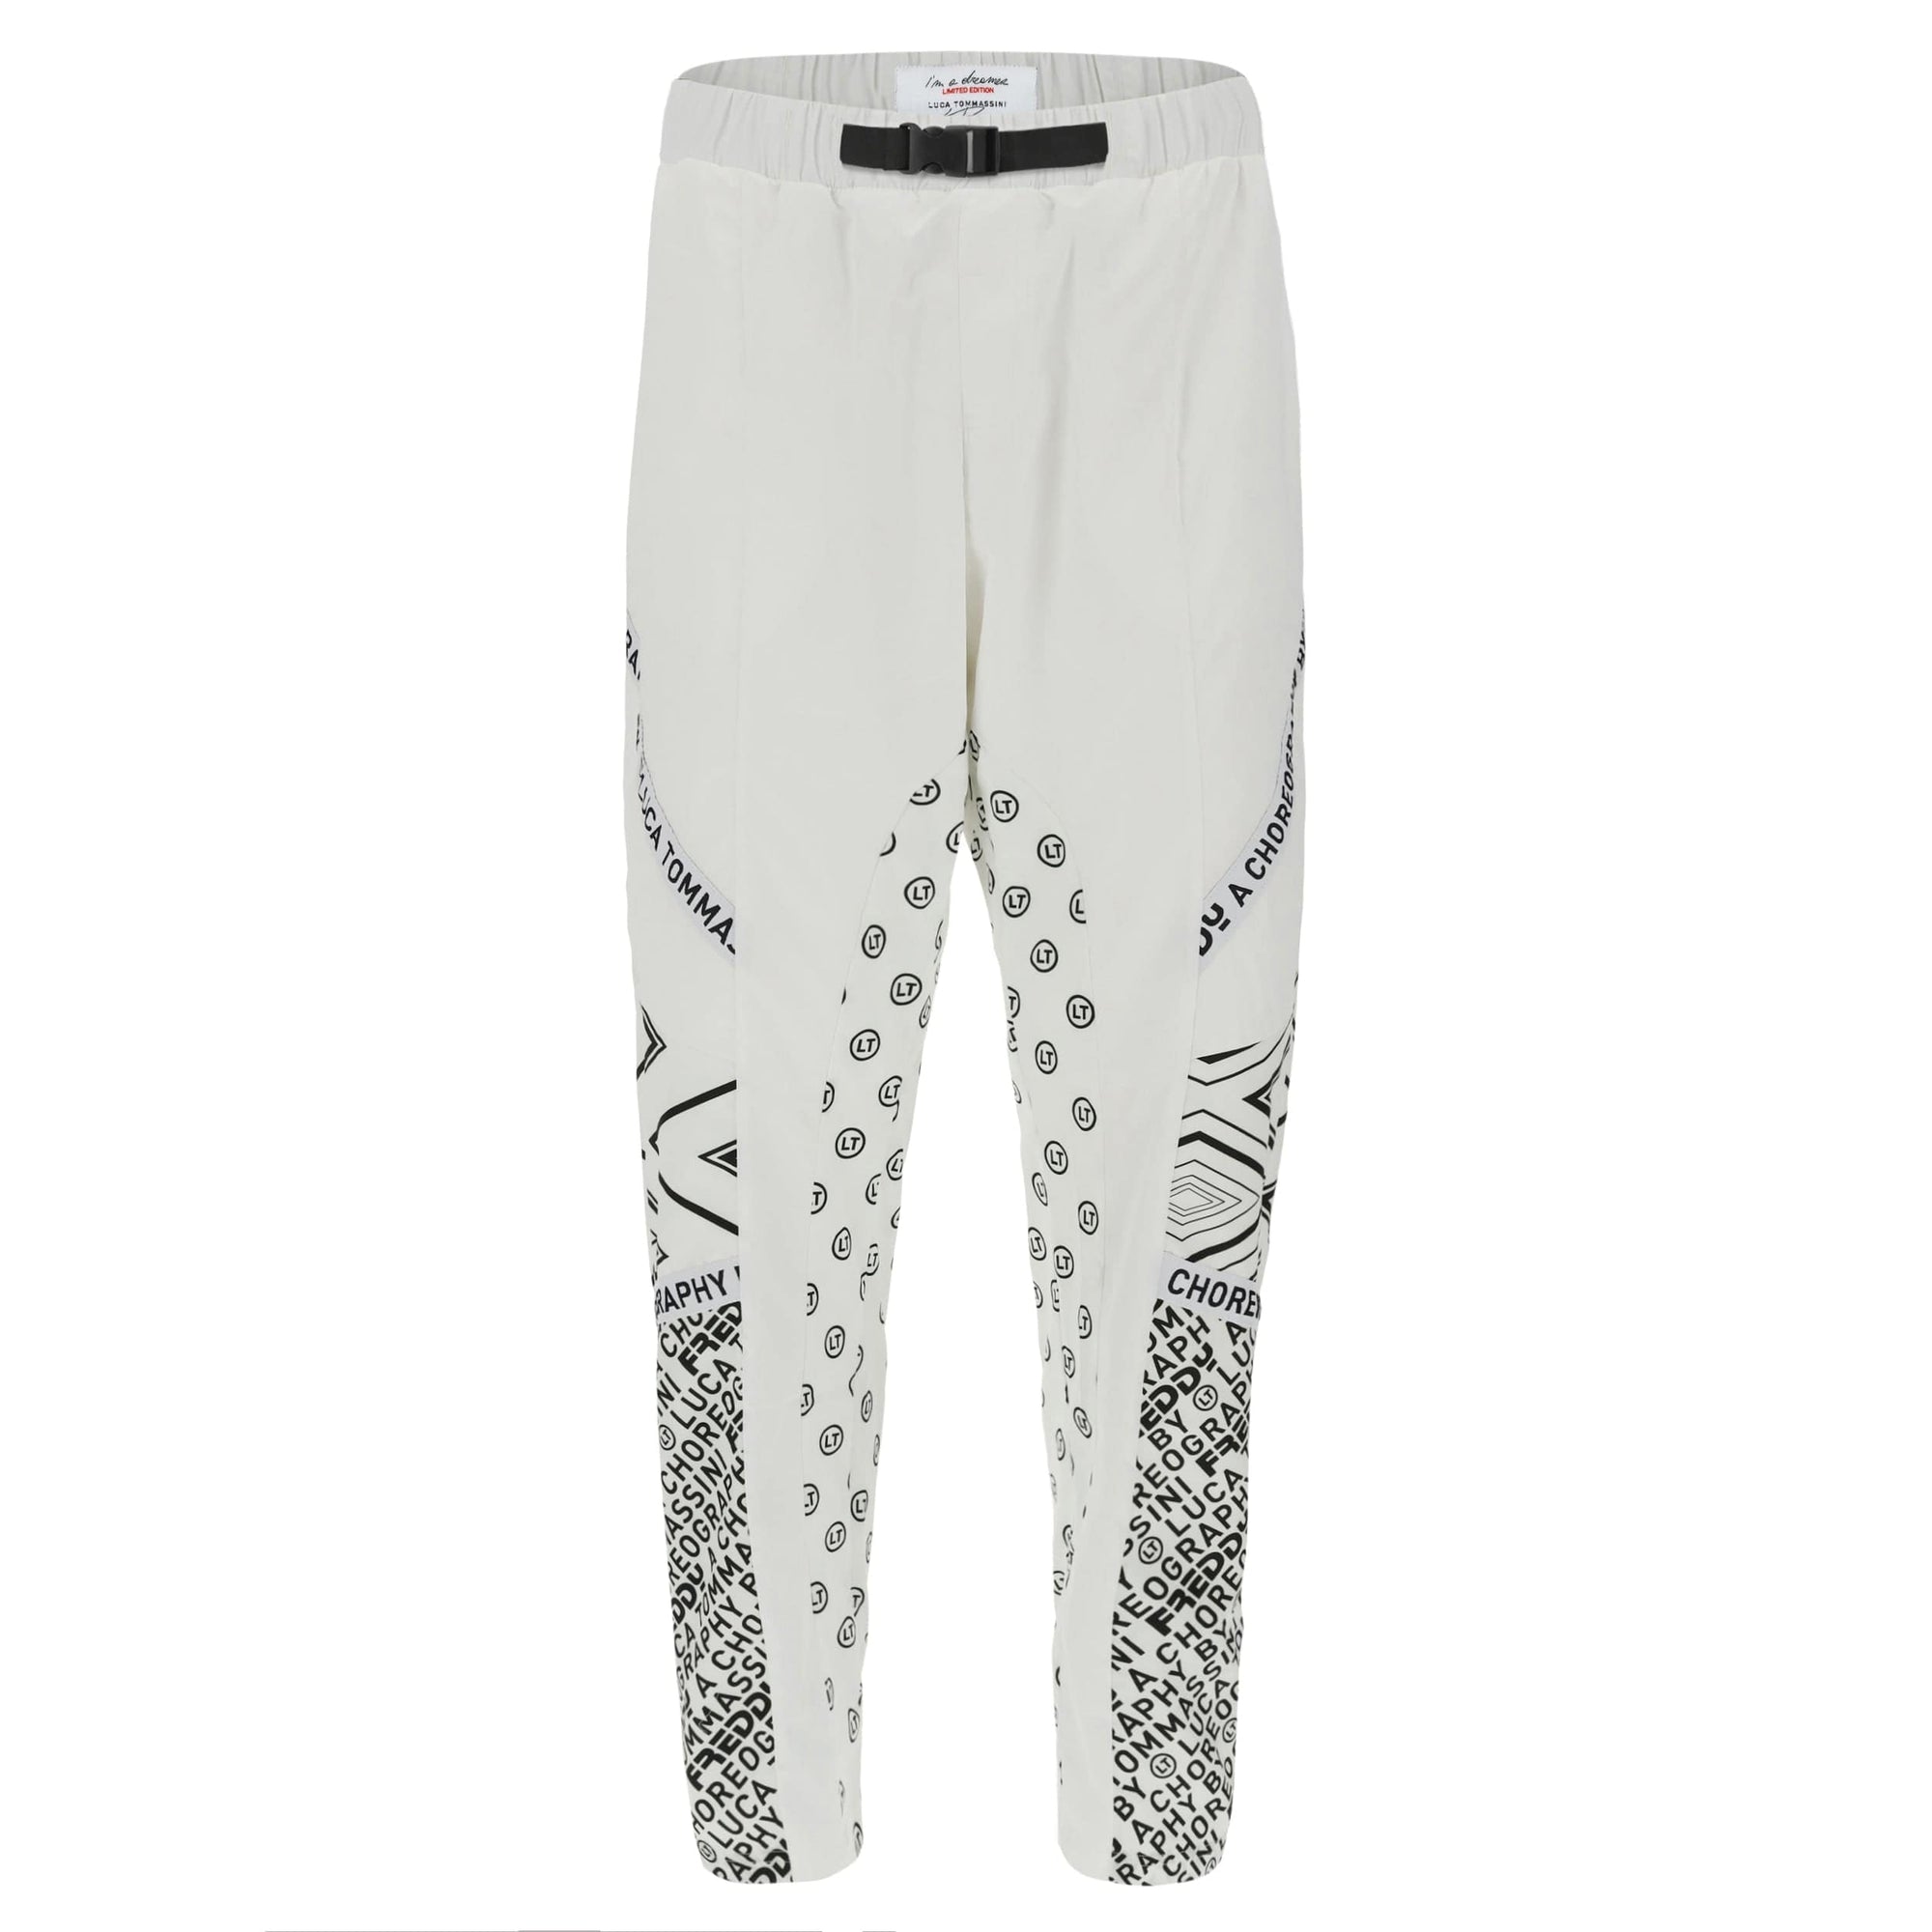 Trousers unisex with pattern print - A Choreography by Luca Tommassini - White 1